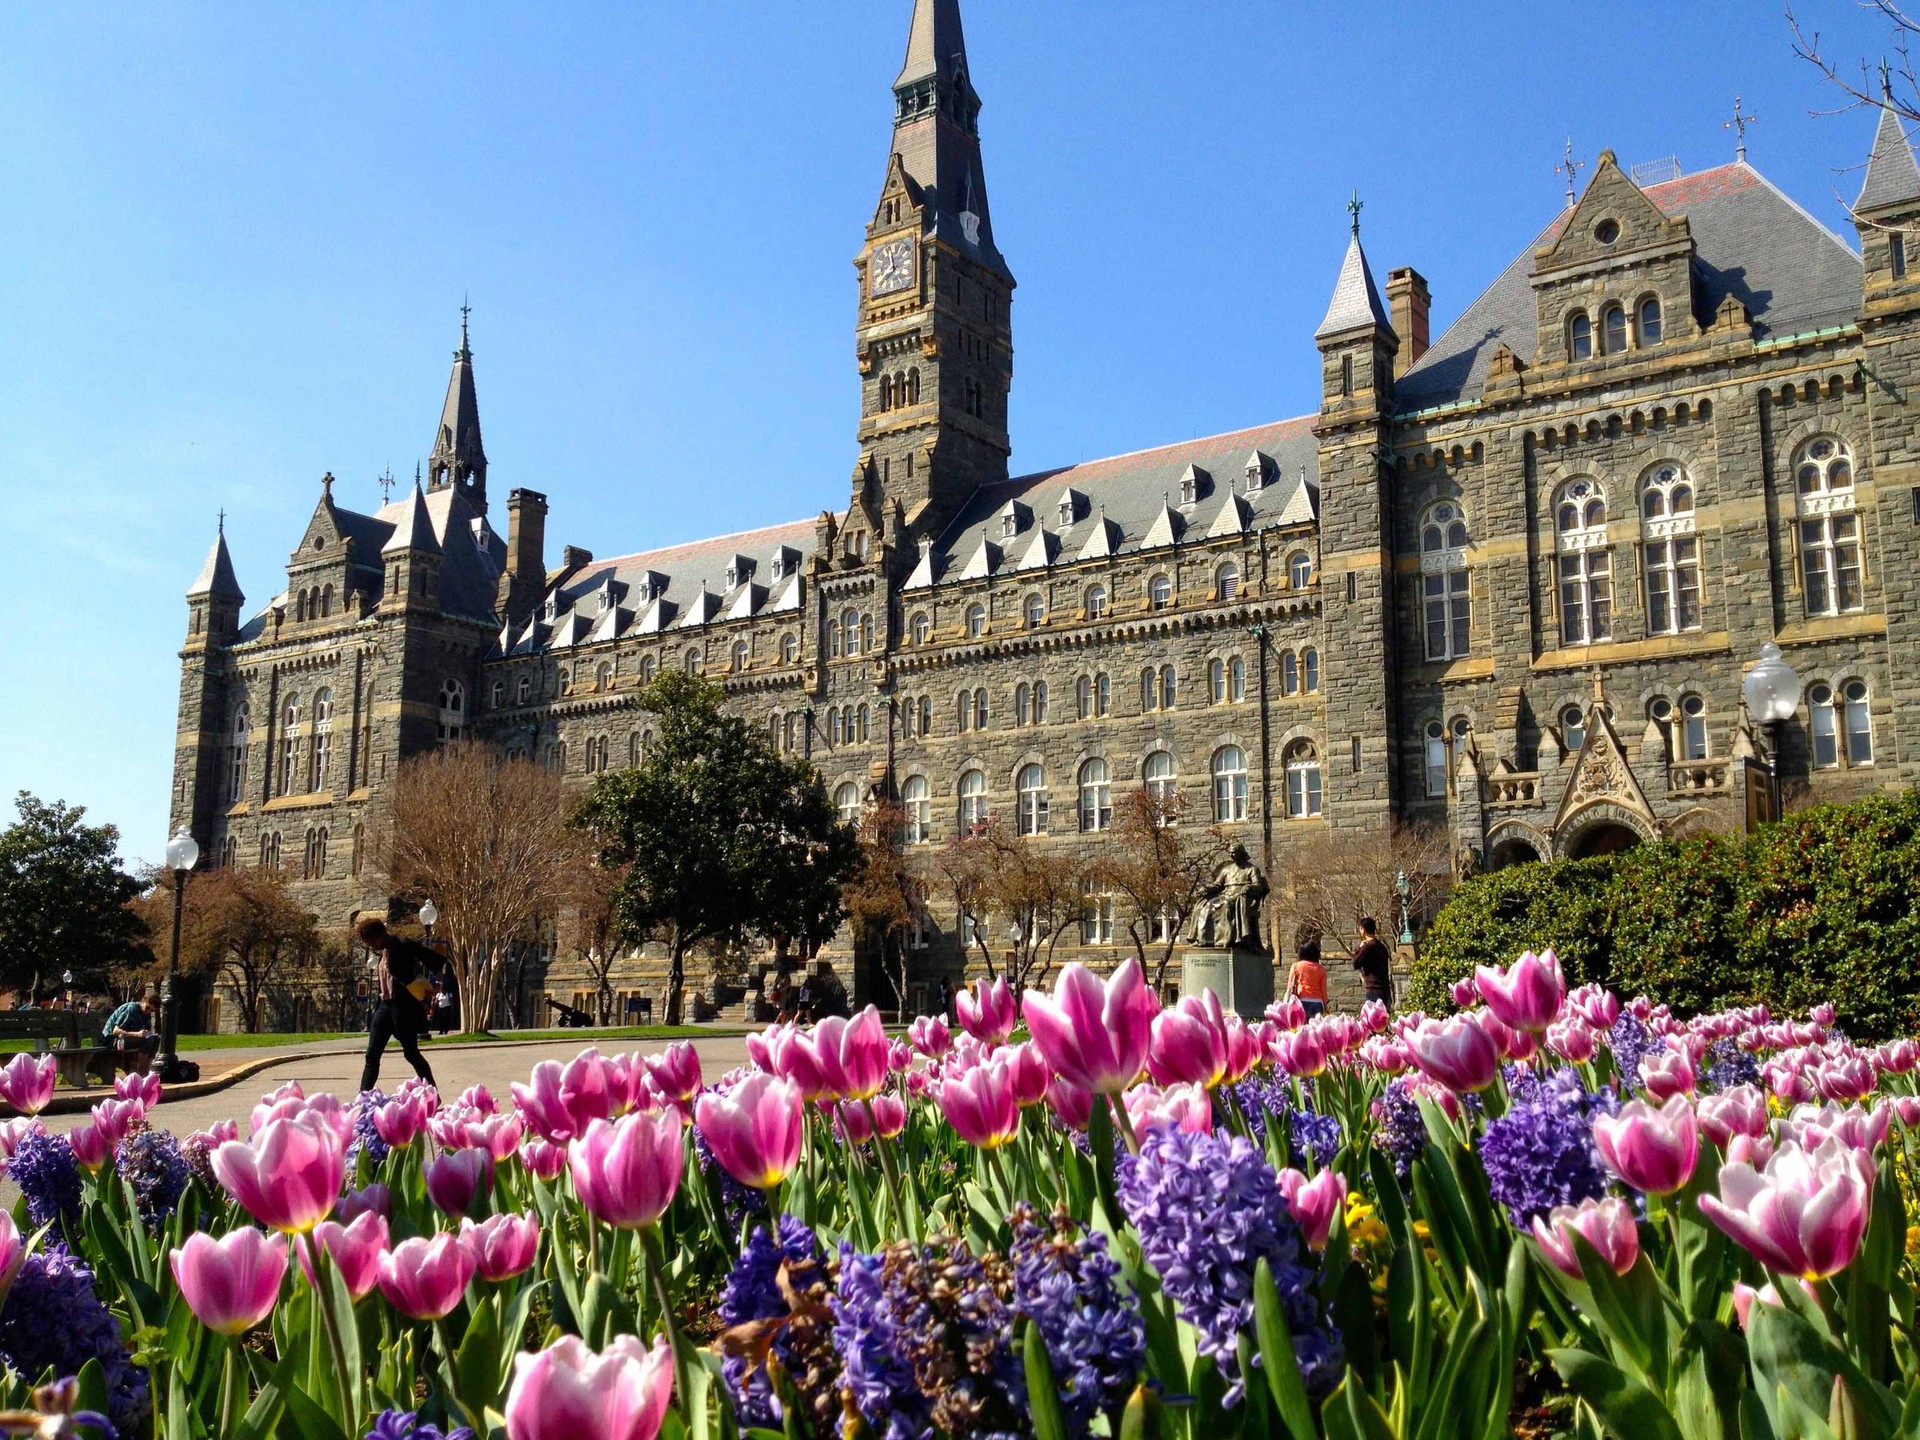 The clocktower rises above Healy Hall with pink flowers in the foreground